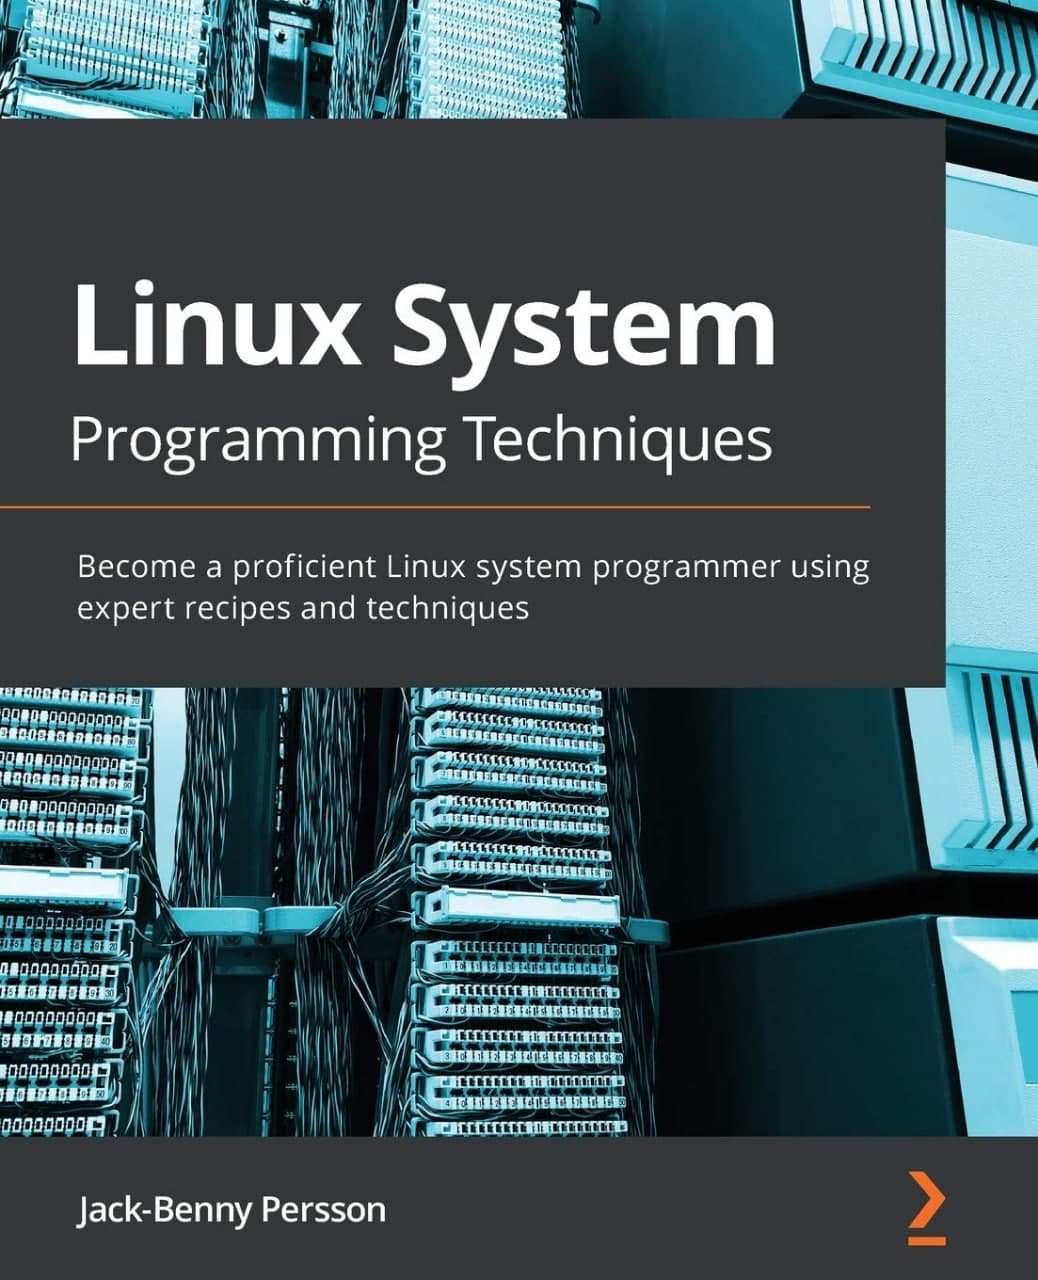 Linux_System_Programming_Techniques_Become_a_proficient_Linux_system.jpg